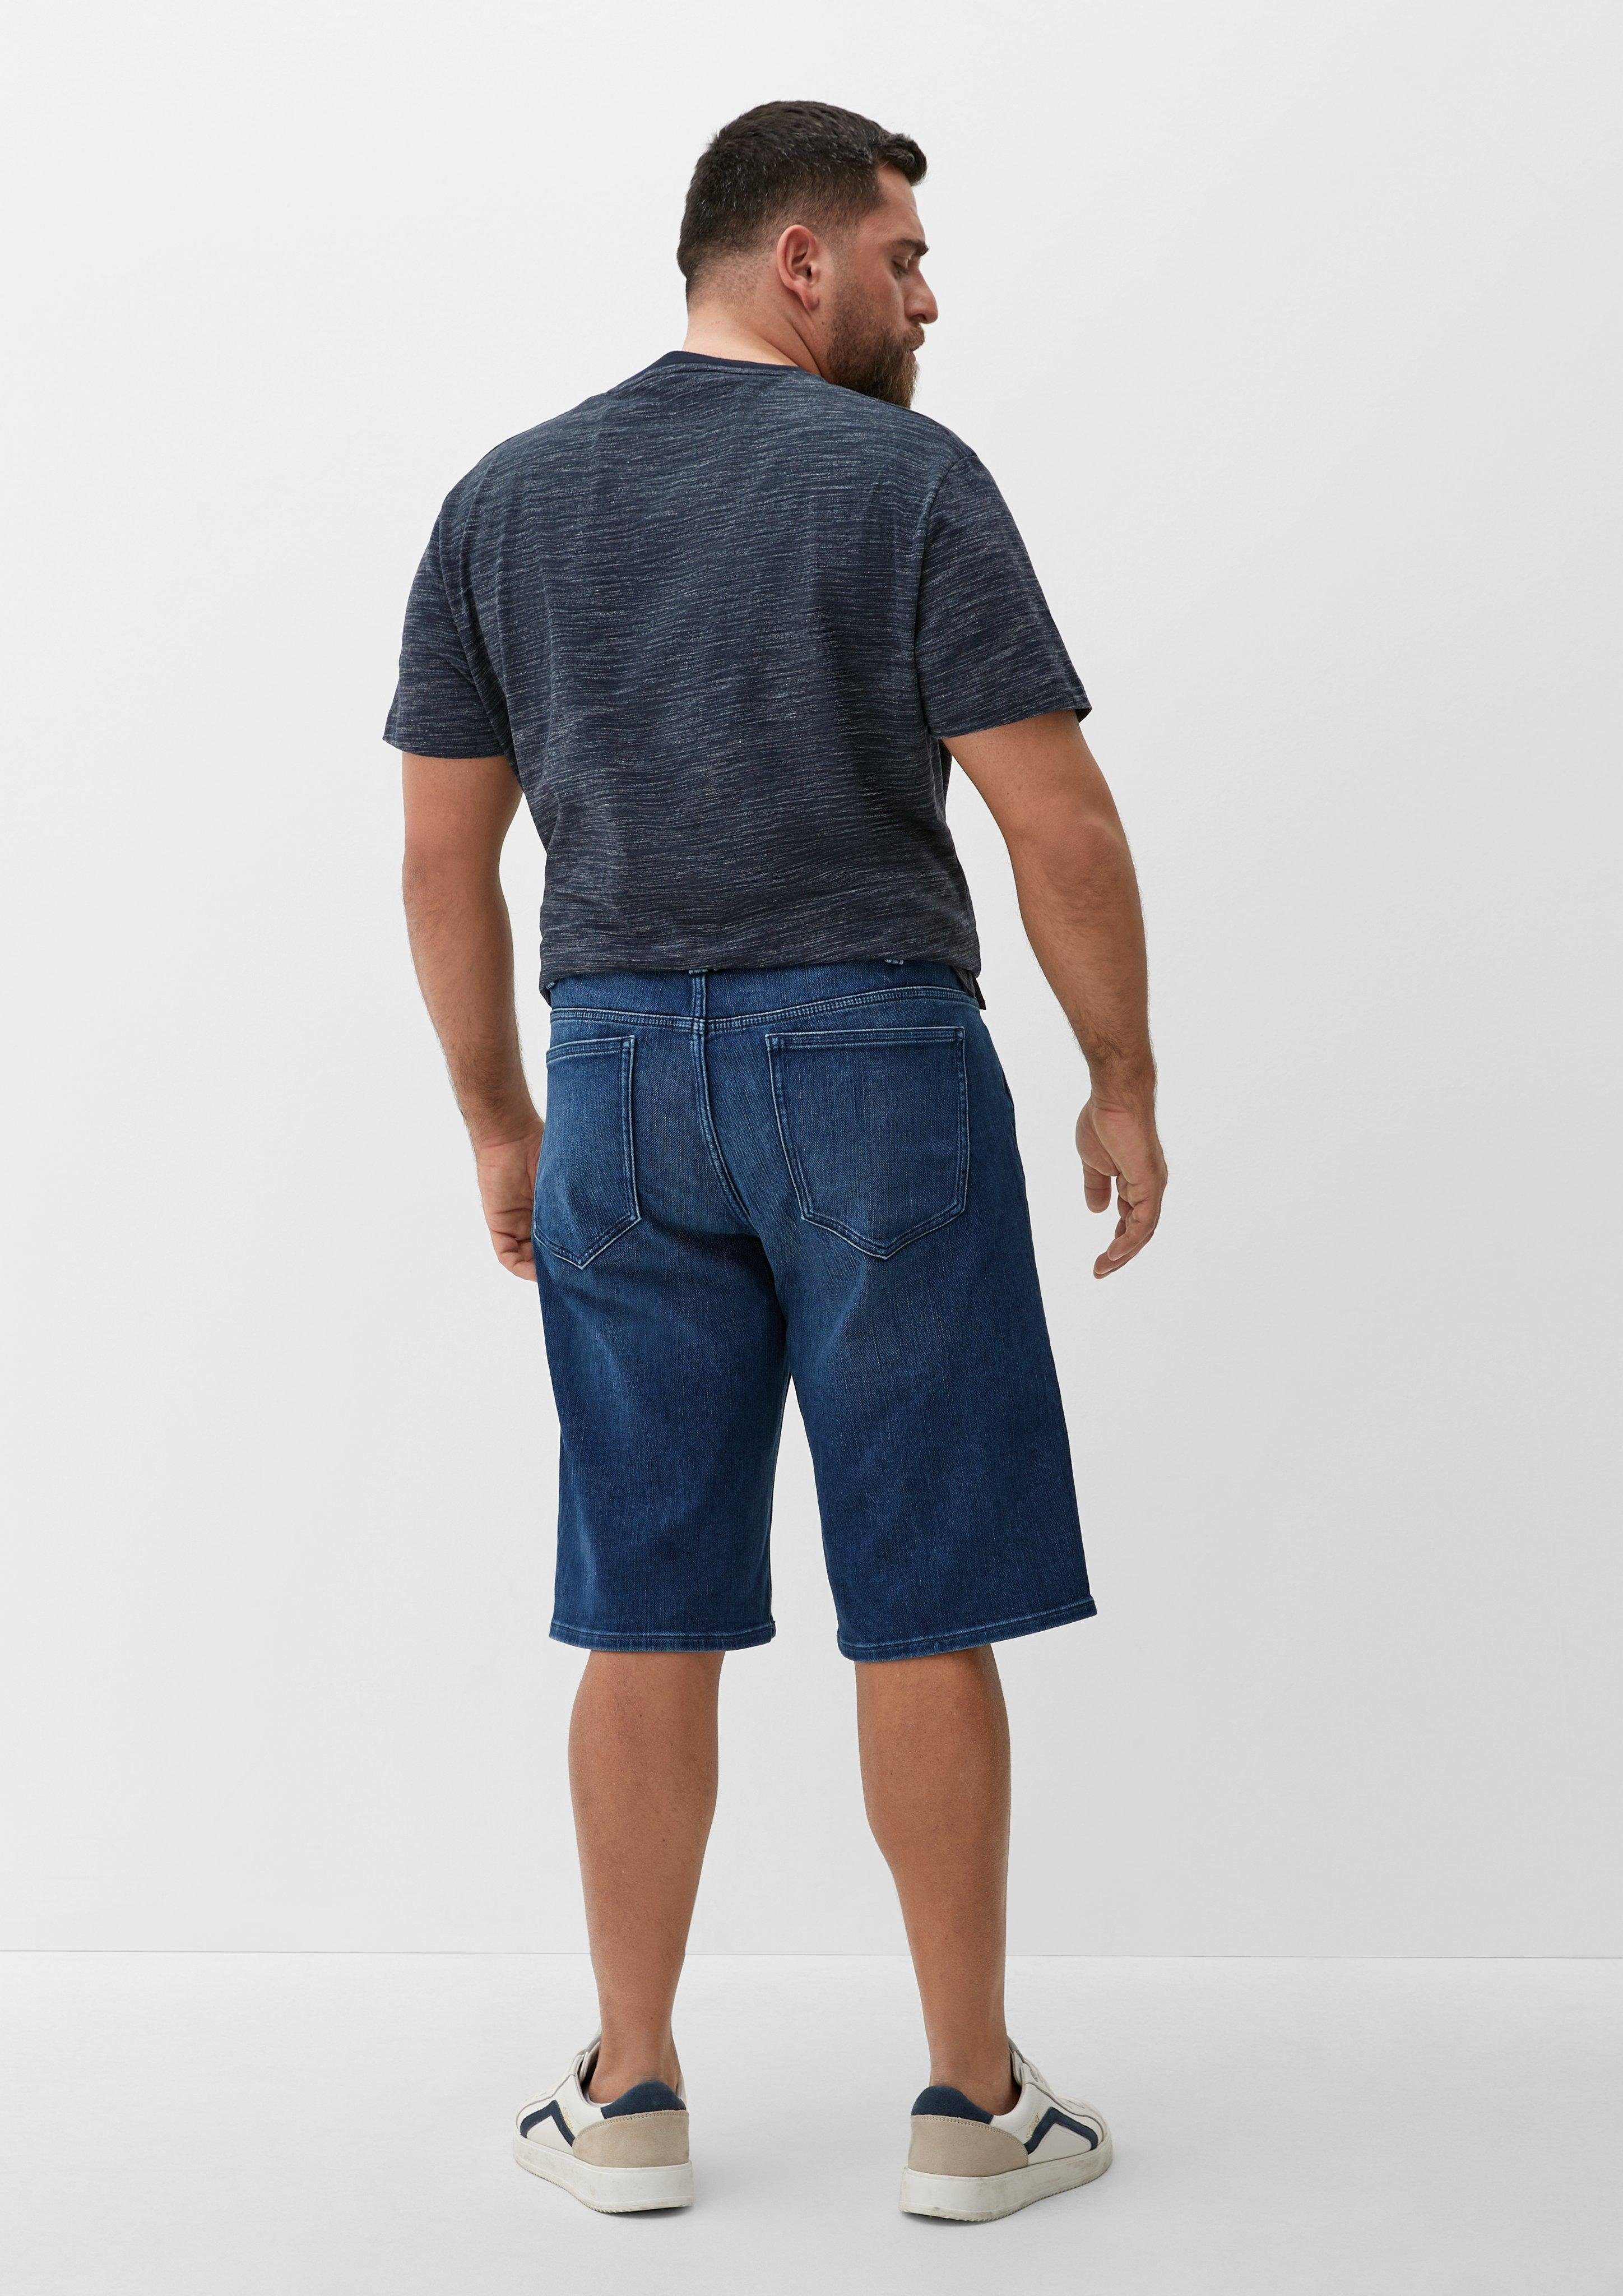 / Relaxed Casby Rise tiefblau Straight Fit / Mid s.Oliver Jeans-Shorts / Jeansshorts Leg